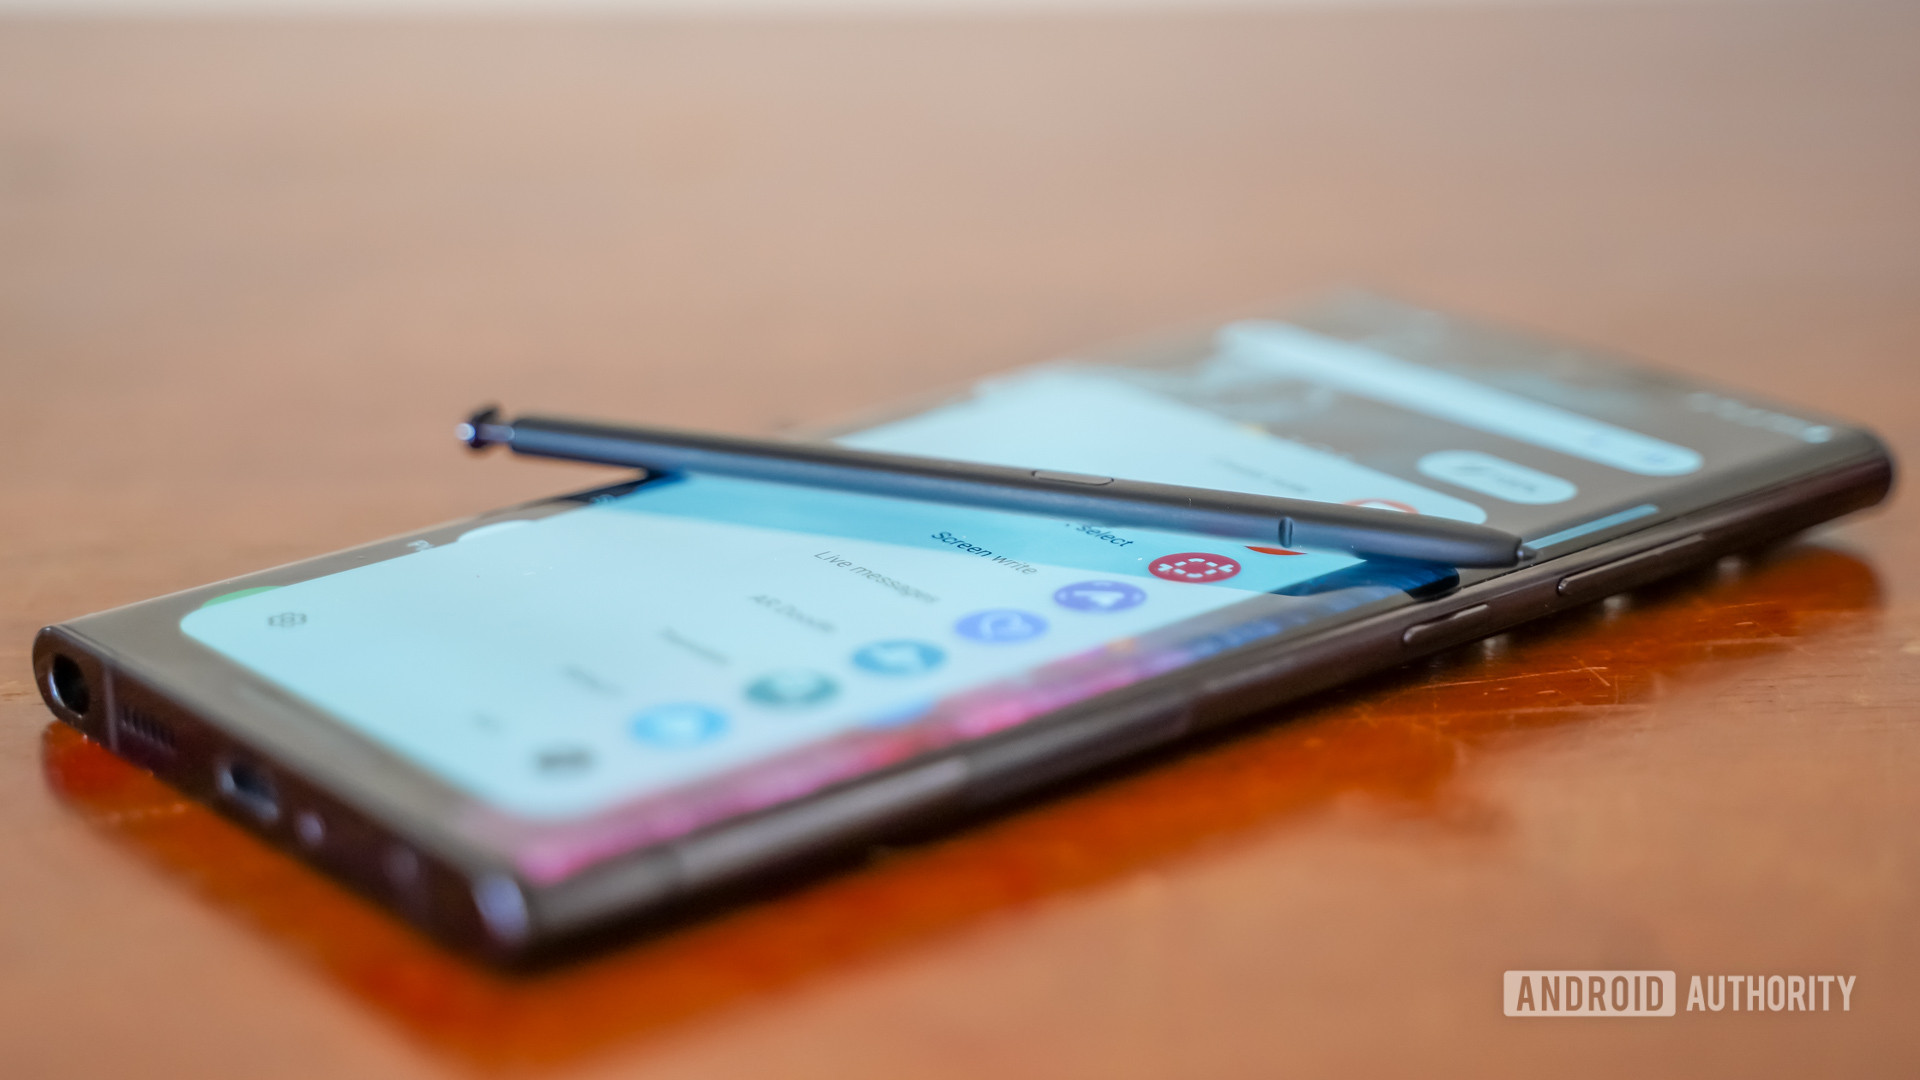 Samsung Galaxy S22 Ultra with S pen at rest